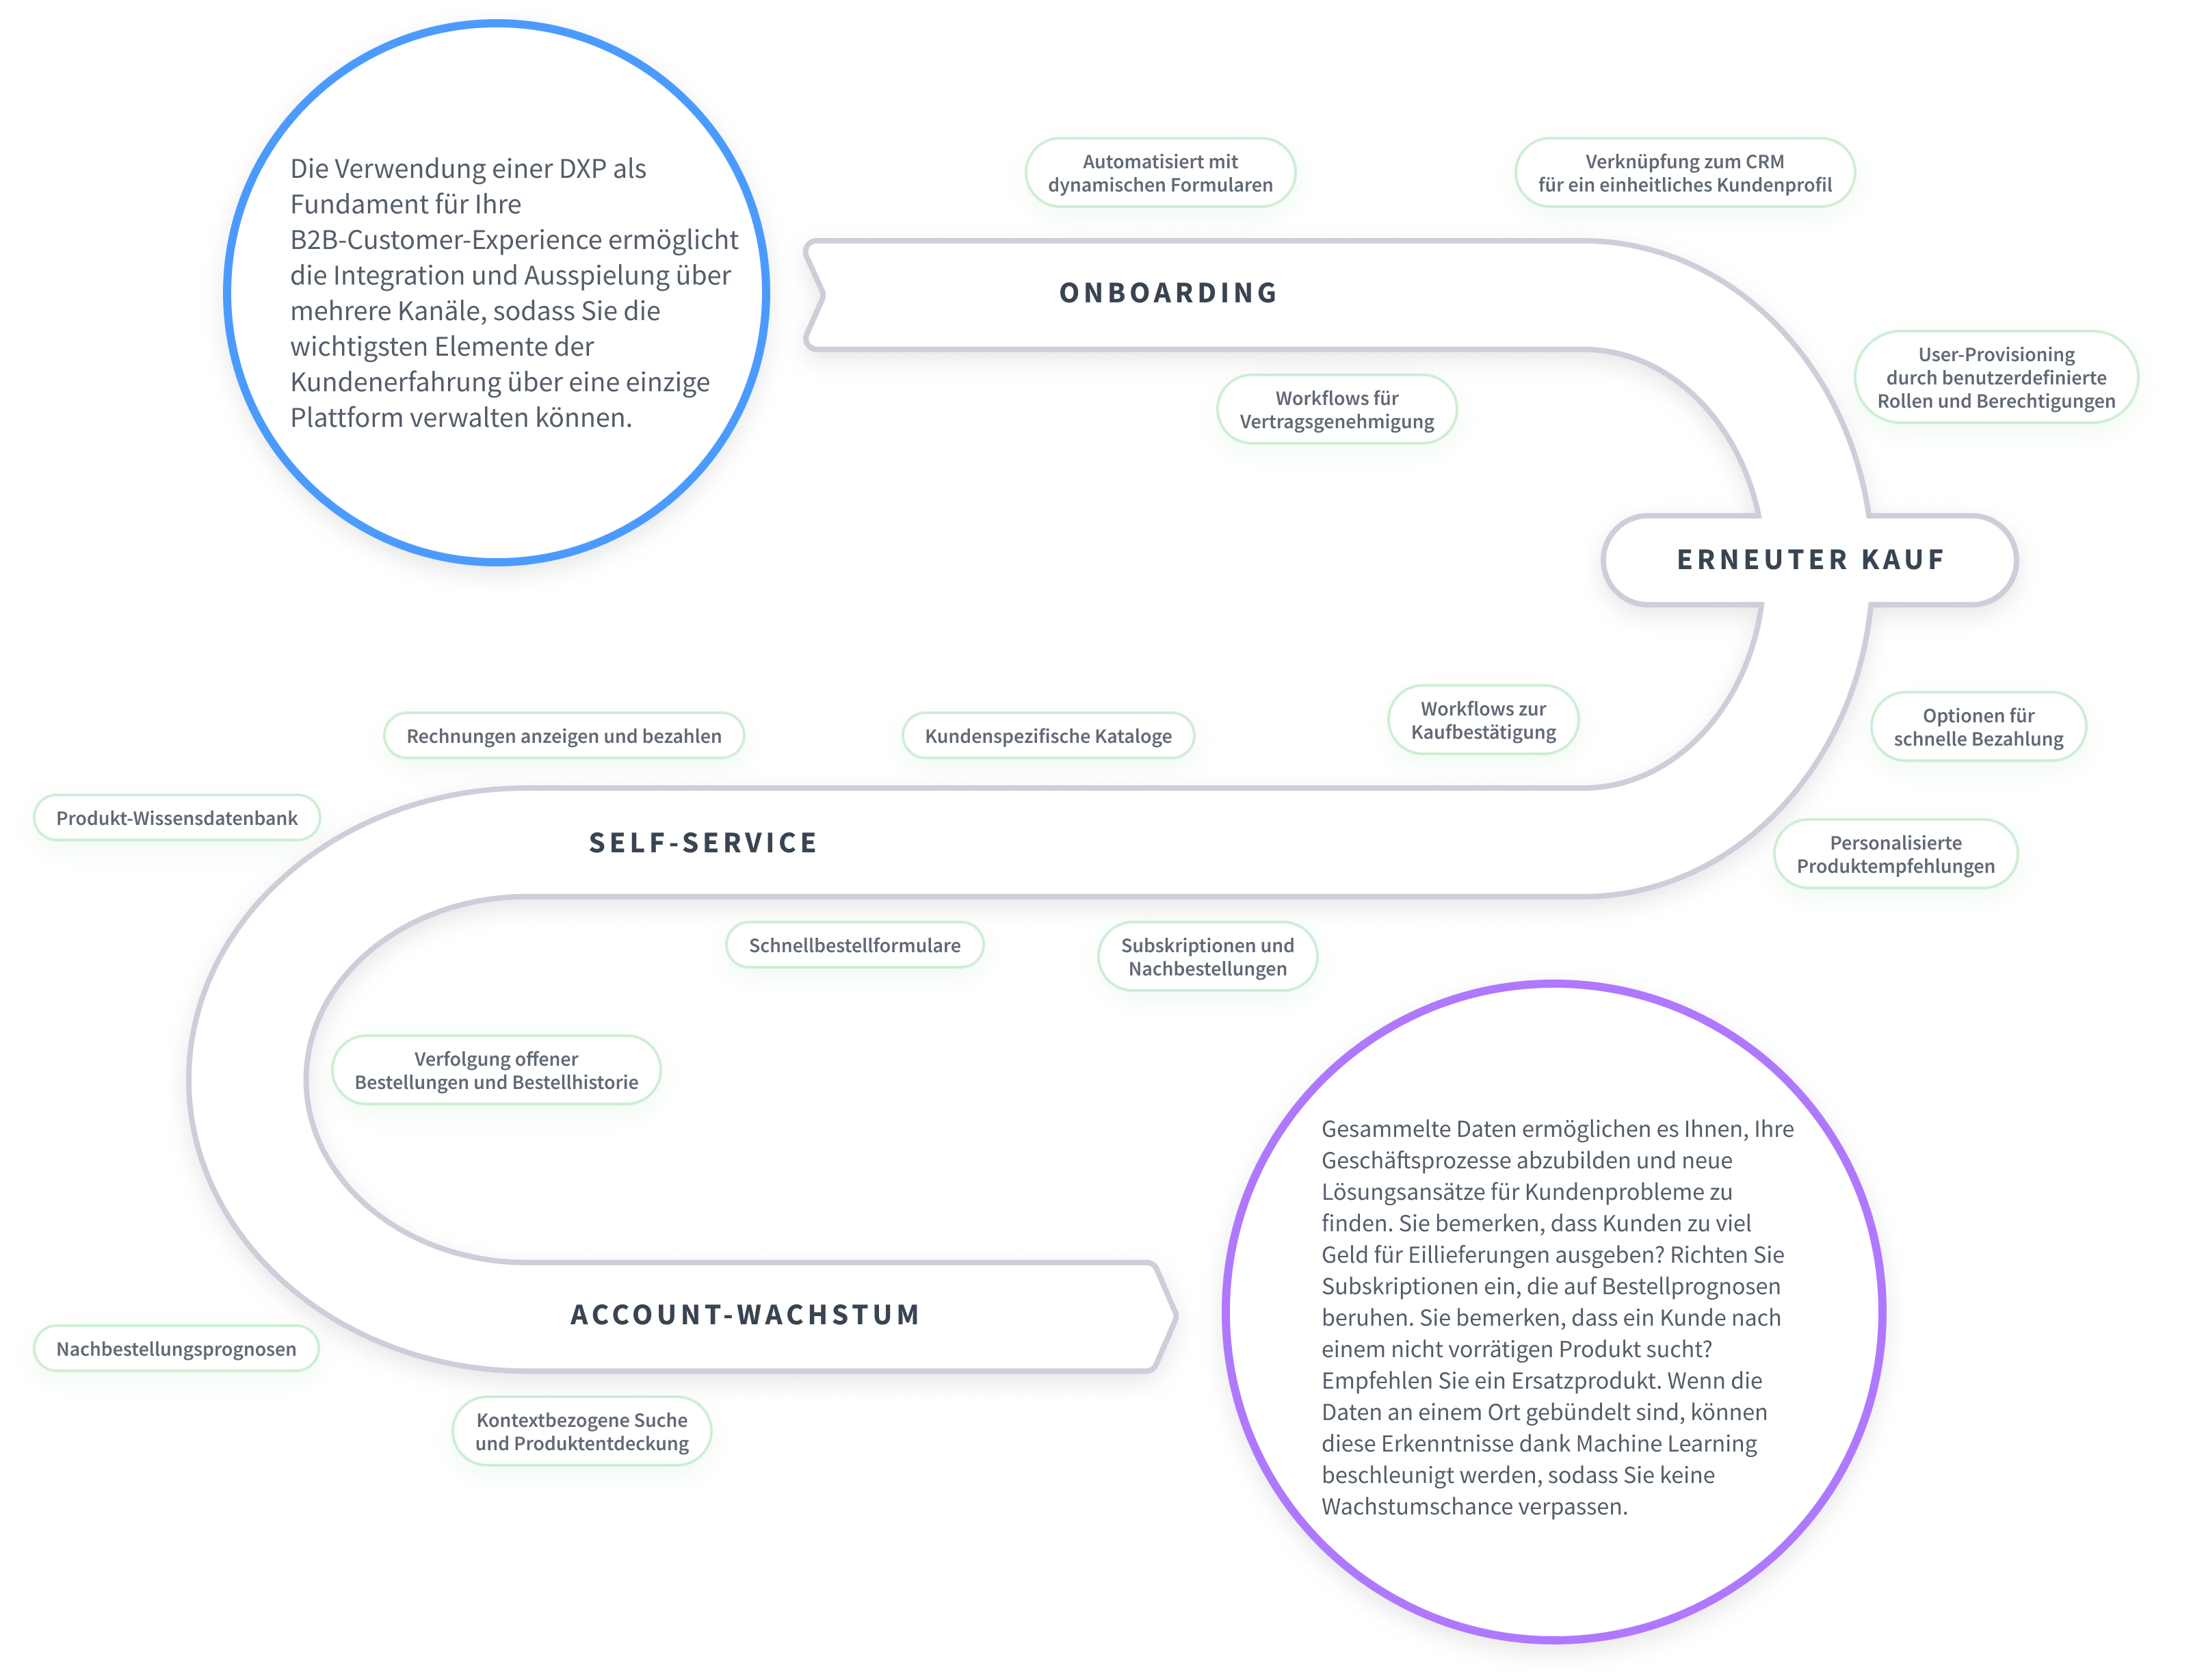 Diagram of a B2B buyers journey with a DXP at the core